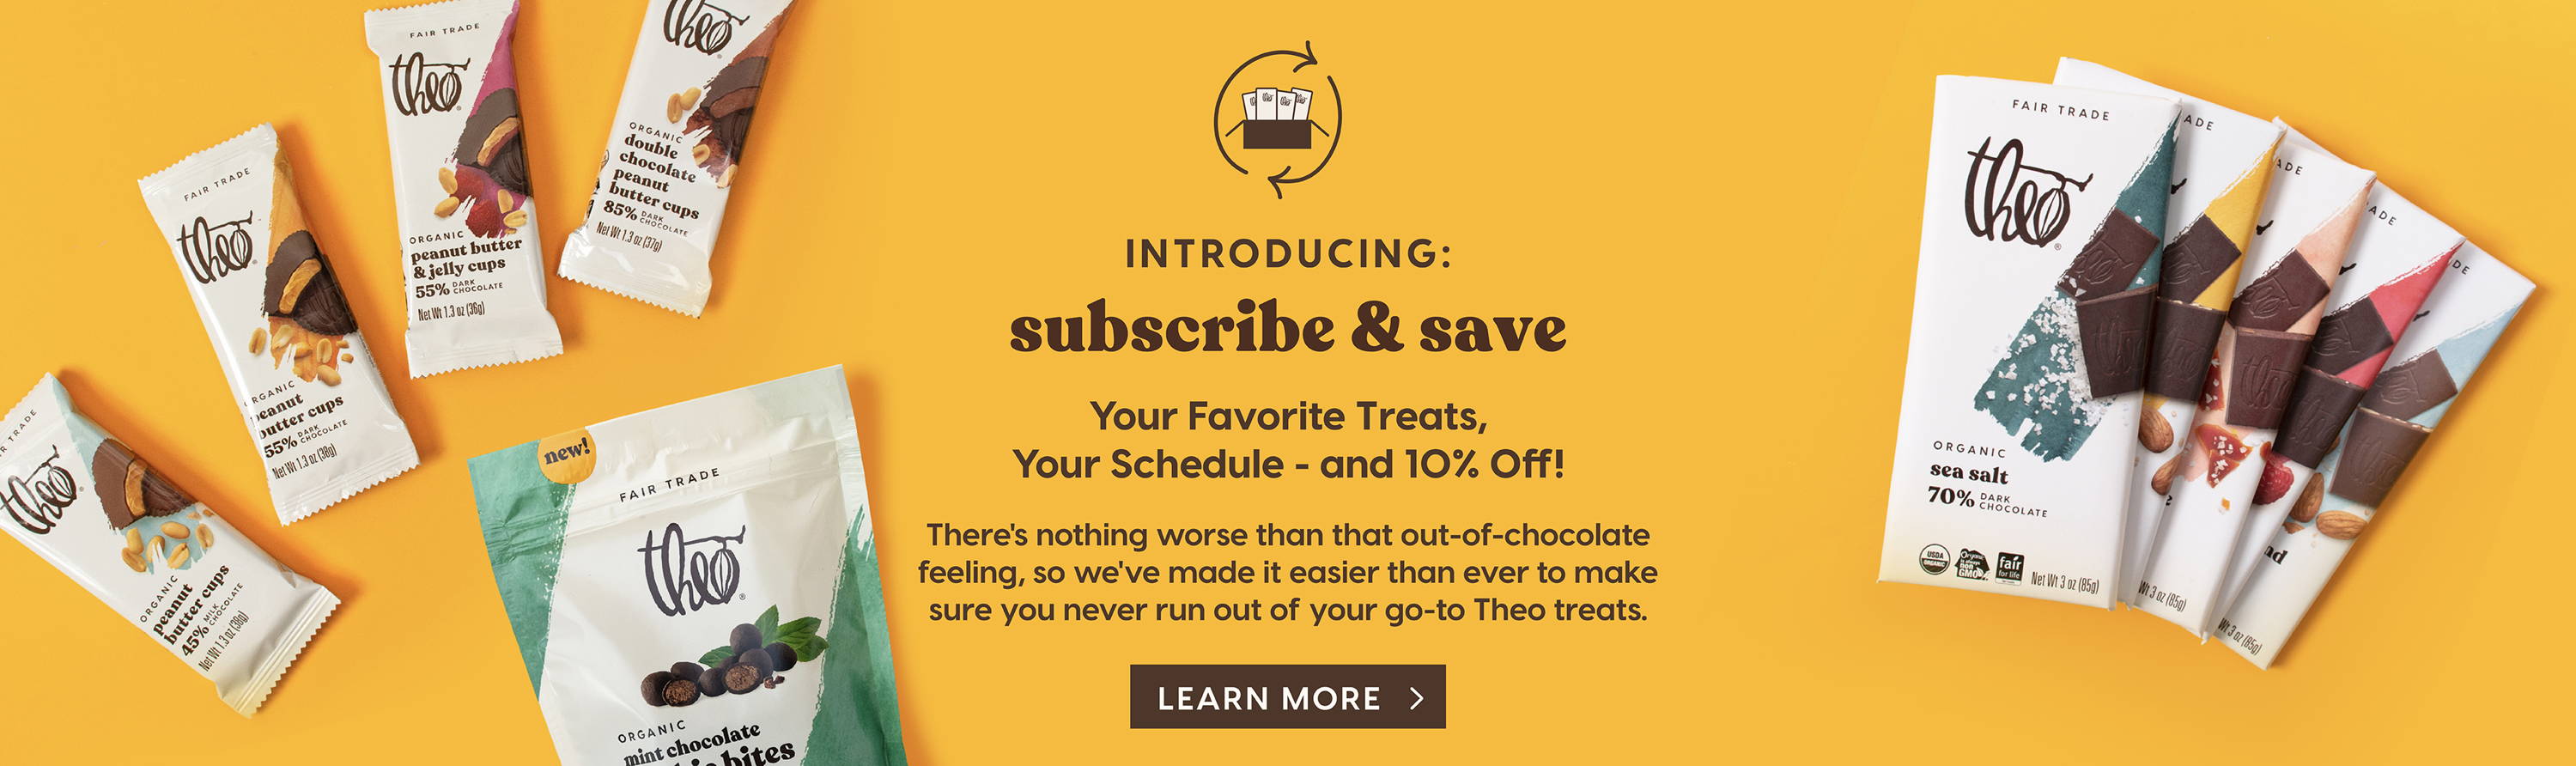 Subscribe & Save: Your Favorite Treats, Your Schedule, and 10% Off